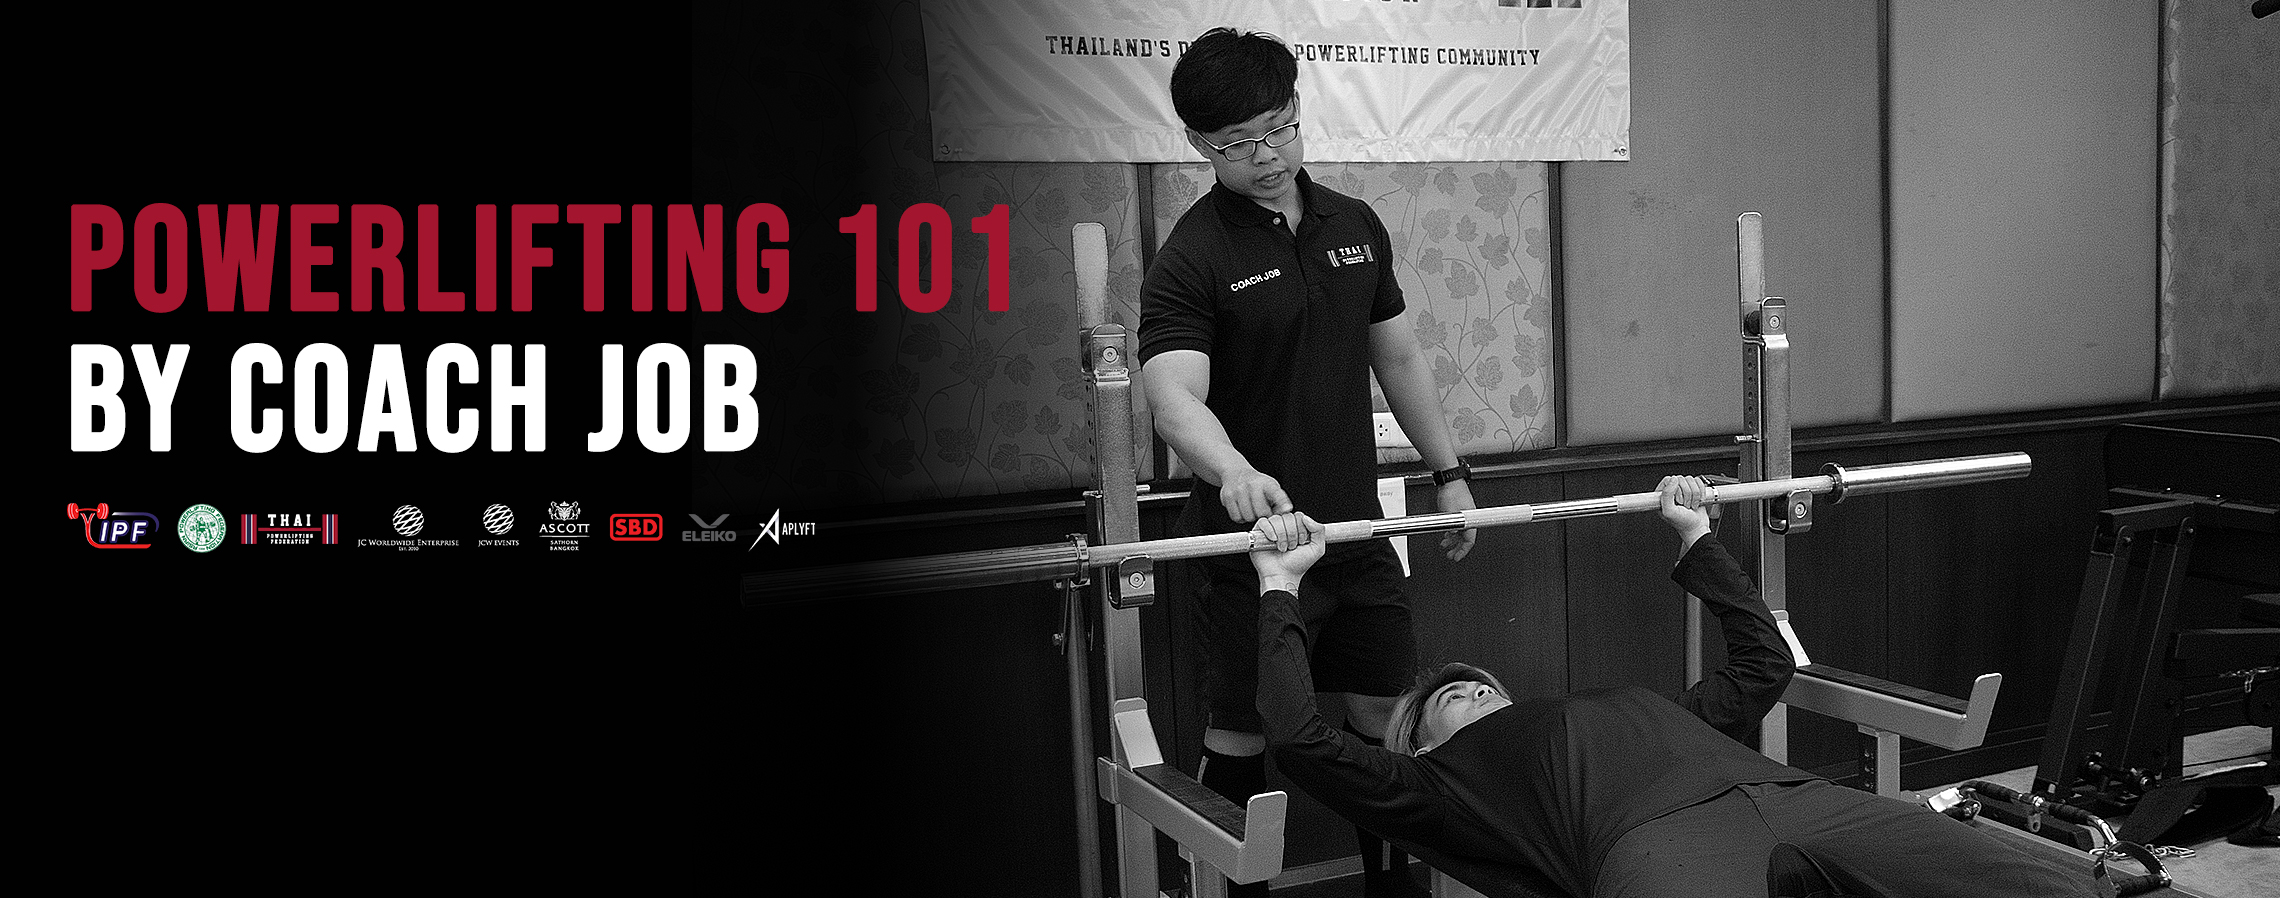 Powerlifting 101 with Coach Job